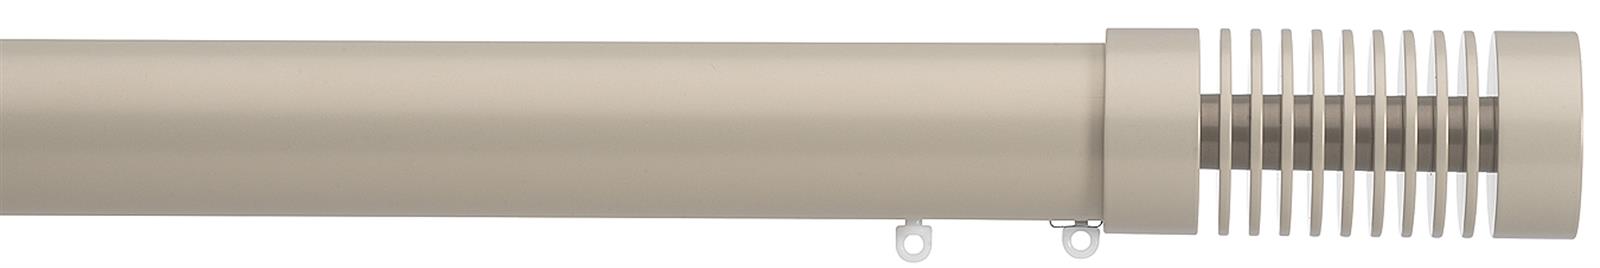 Silent Gliss Metropole 50mm 7620 Taupe Groove Cylinder Finial